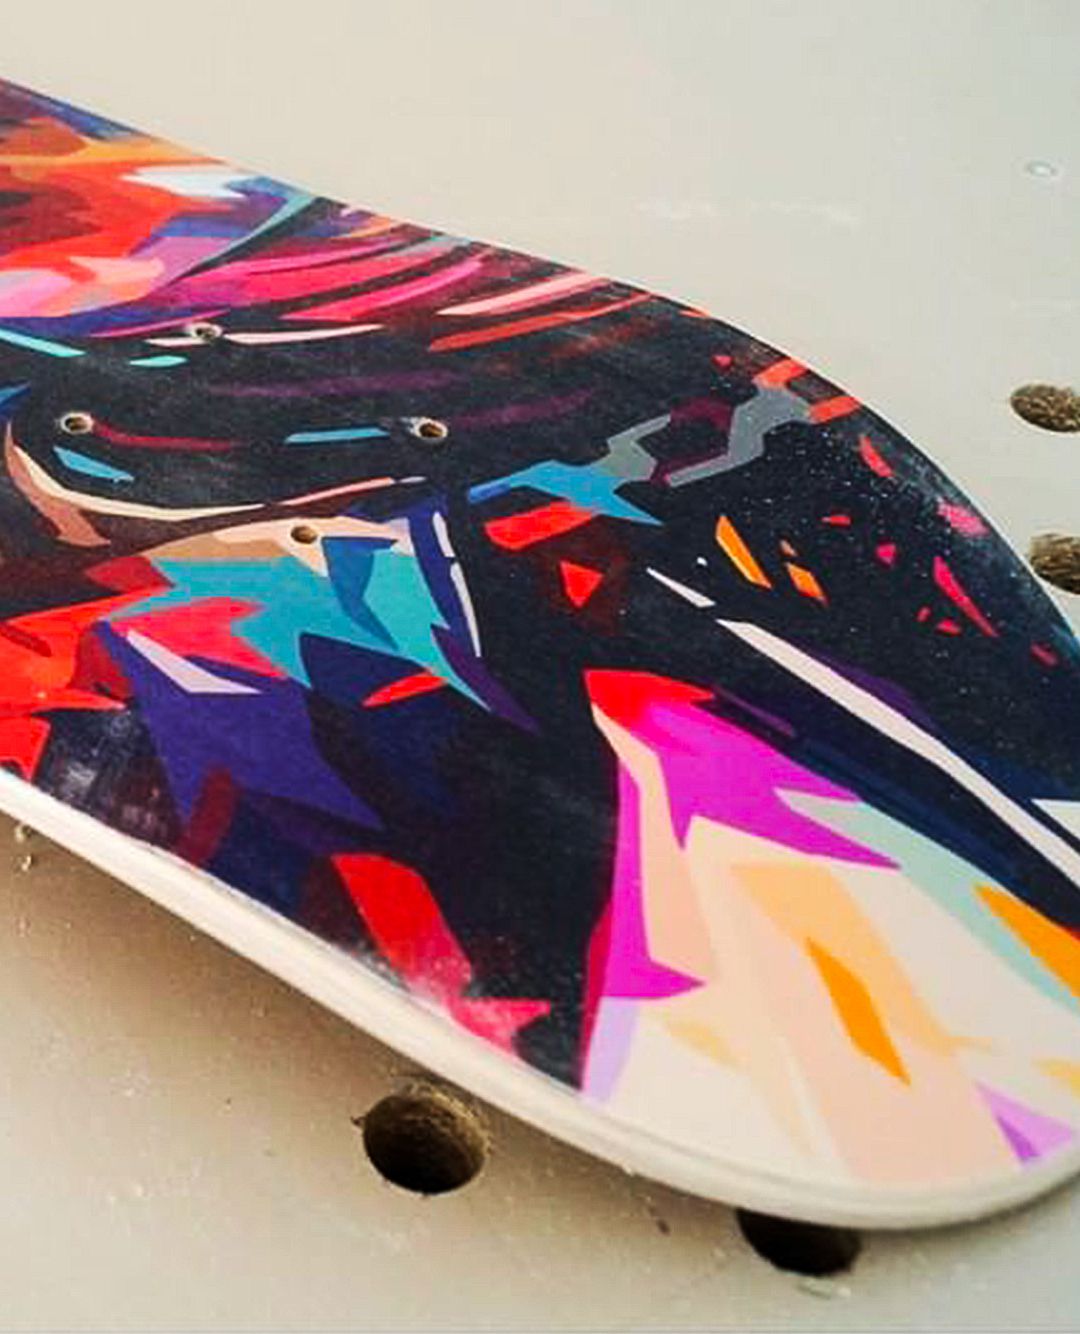 Droid Father Soldier Skateboards By Kaneda X Bonobolabo 3